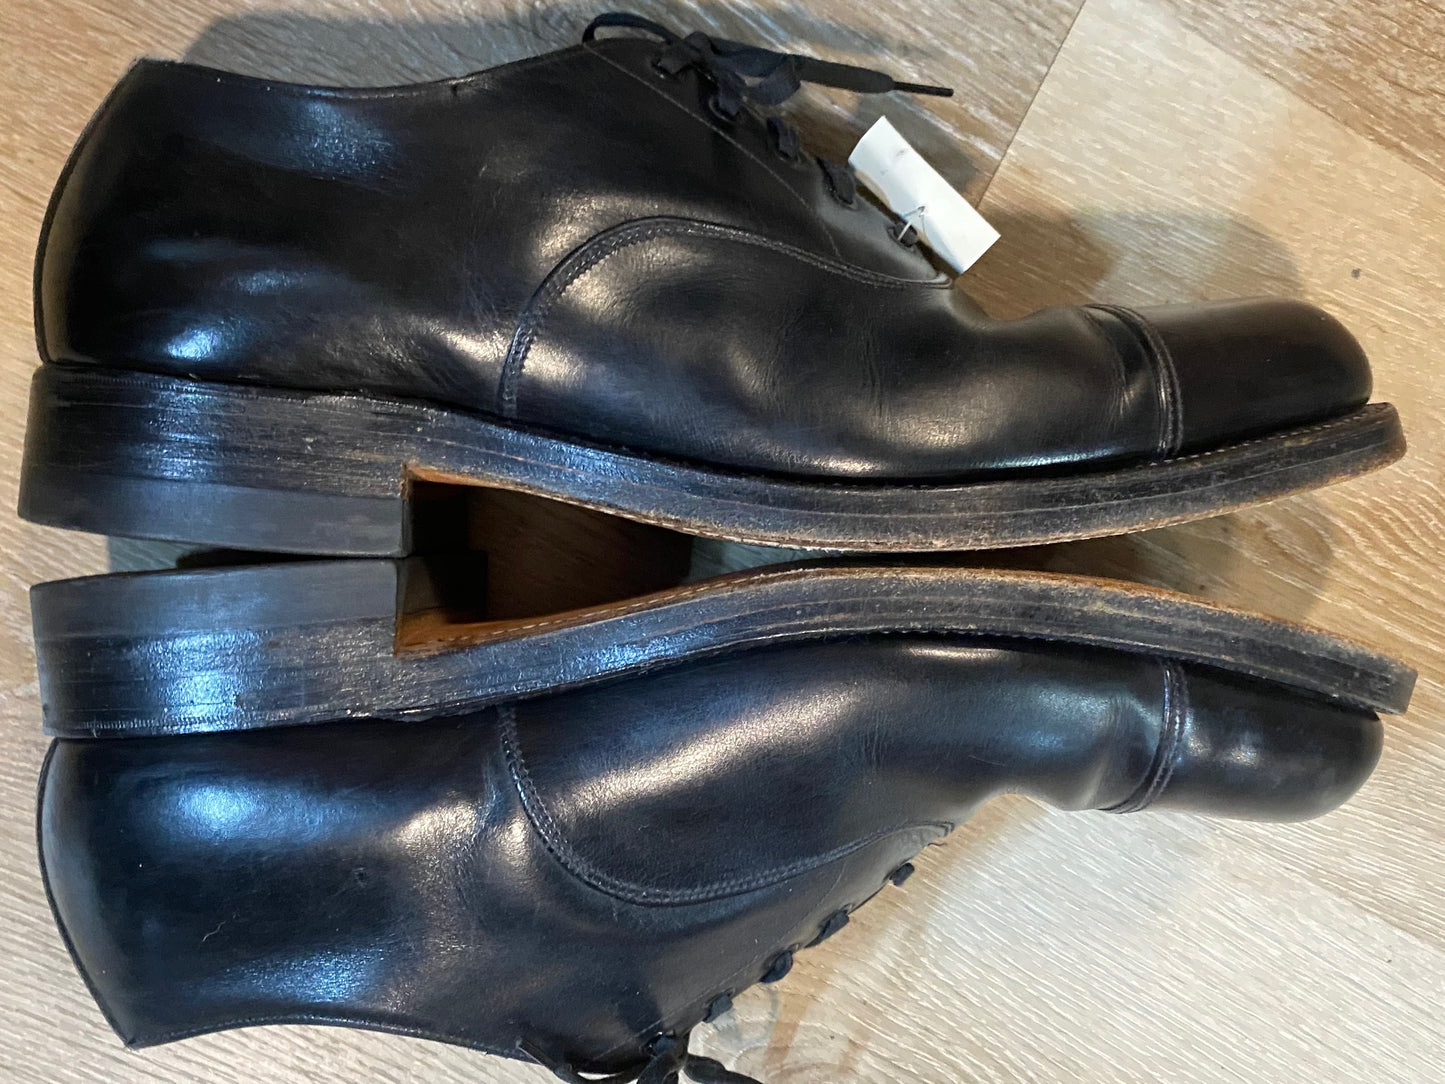 Kingspier Vintage - Black Leather Captoe Oxfords by The Hartt Shoe - Sizes: 9M 11W 42EURO, Made in Canada, Custom Grade Leather Soles, Rubber Heels